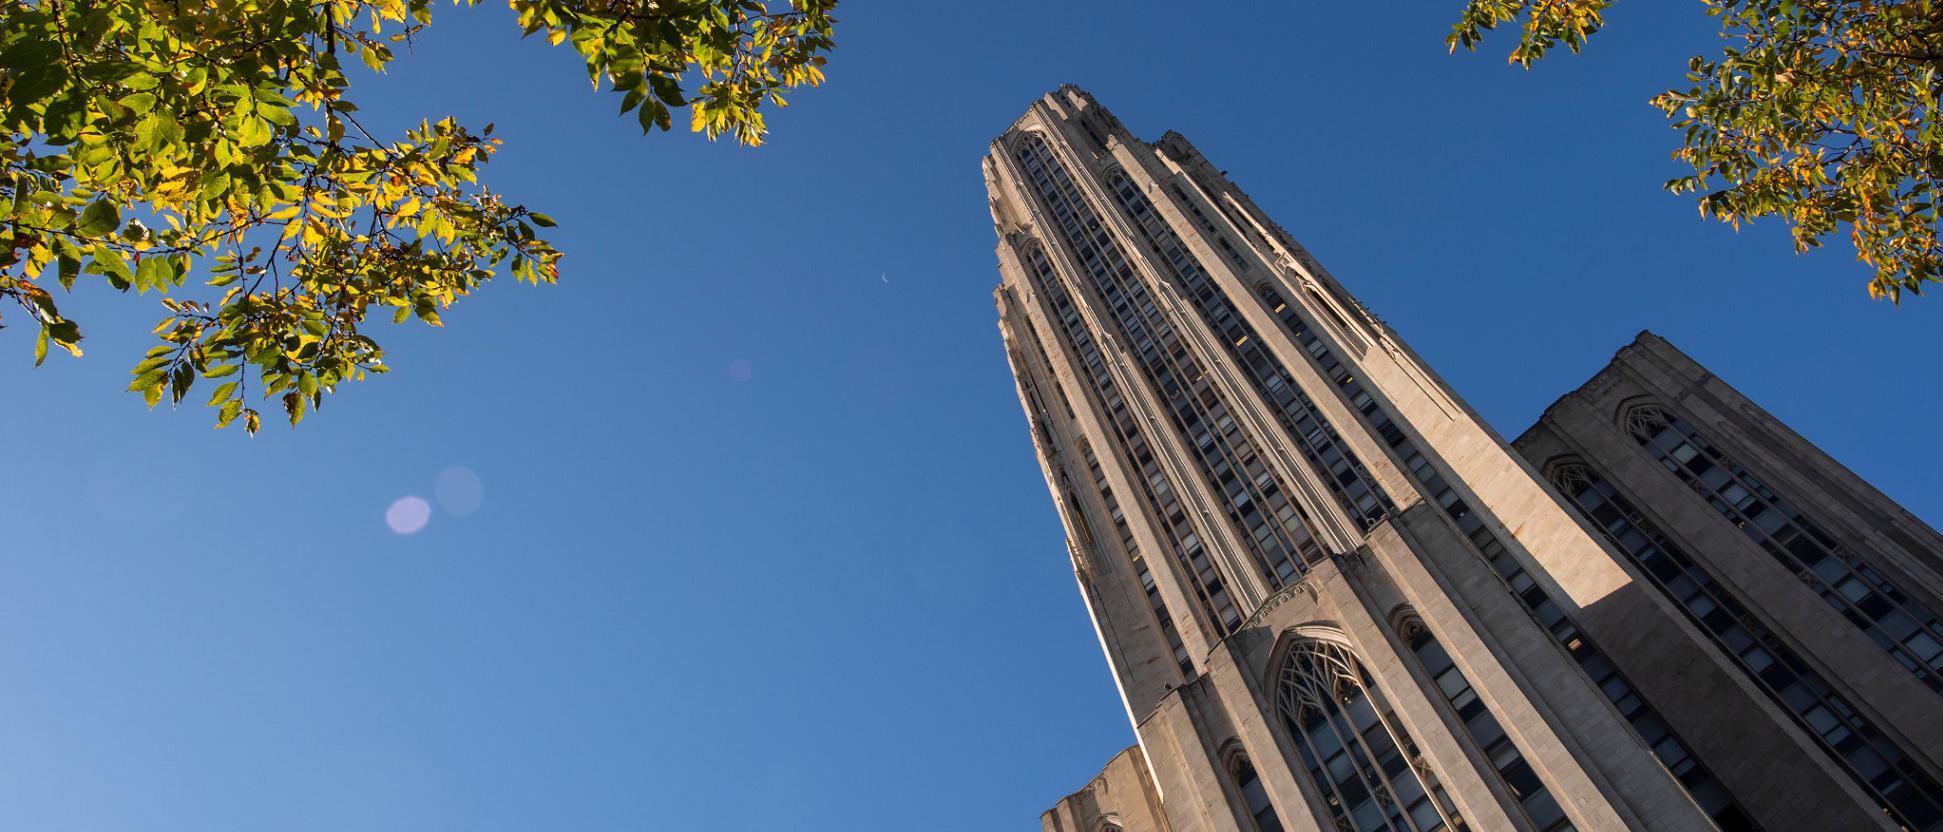 Cathedral of Learning against blue sky